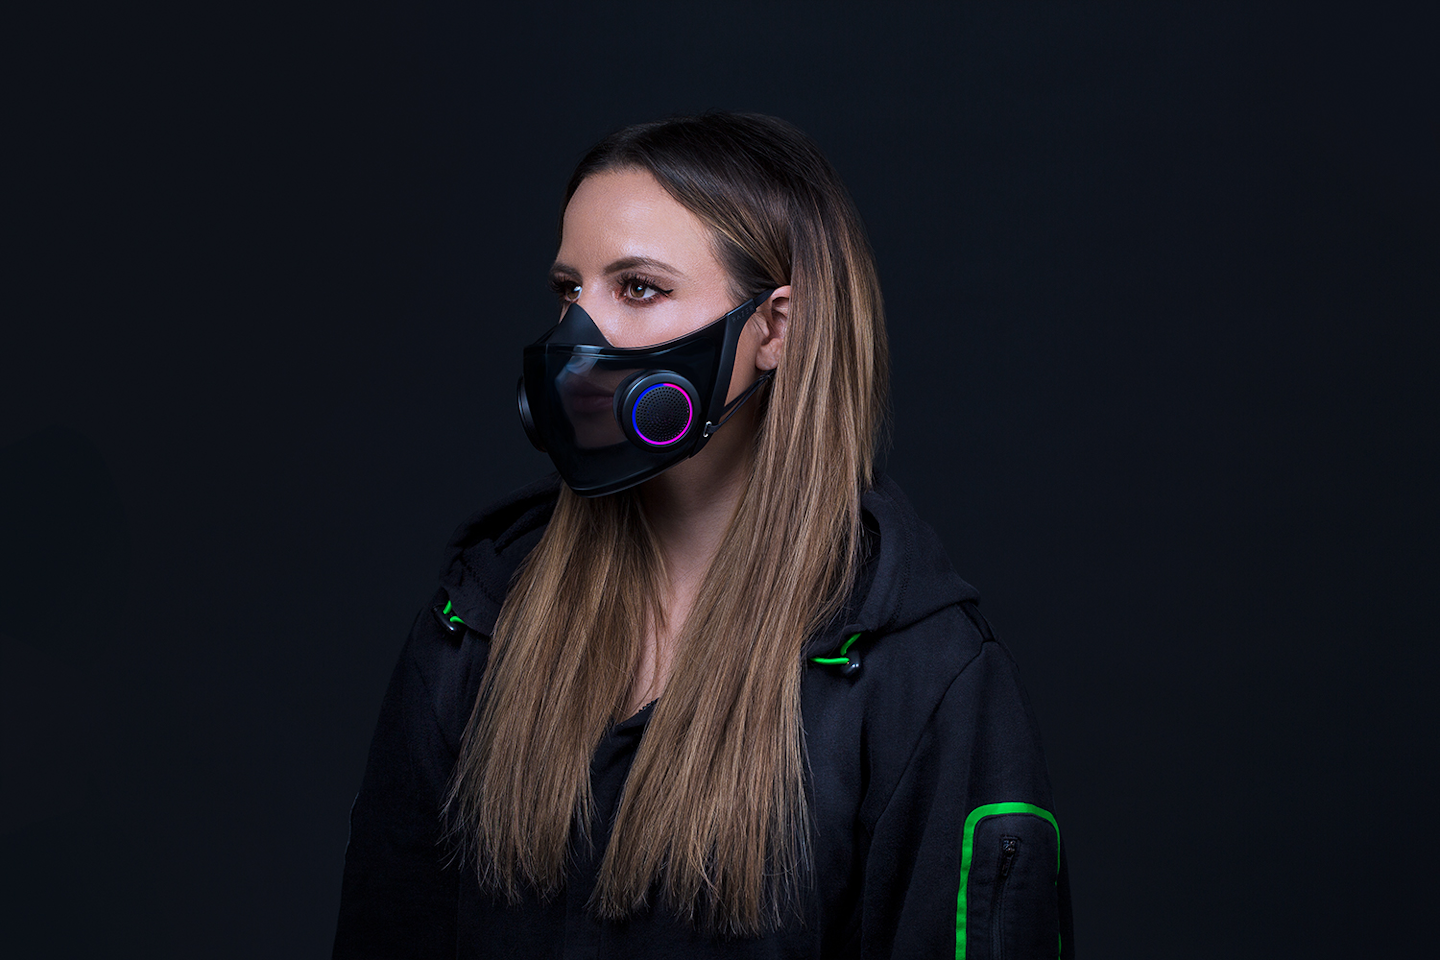 Gaming equipment maker Razer created a reusable face mask featuring a medical-grade respirator and built-in microphone and amplifier.